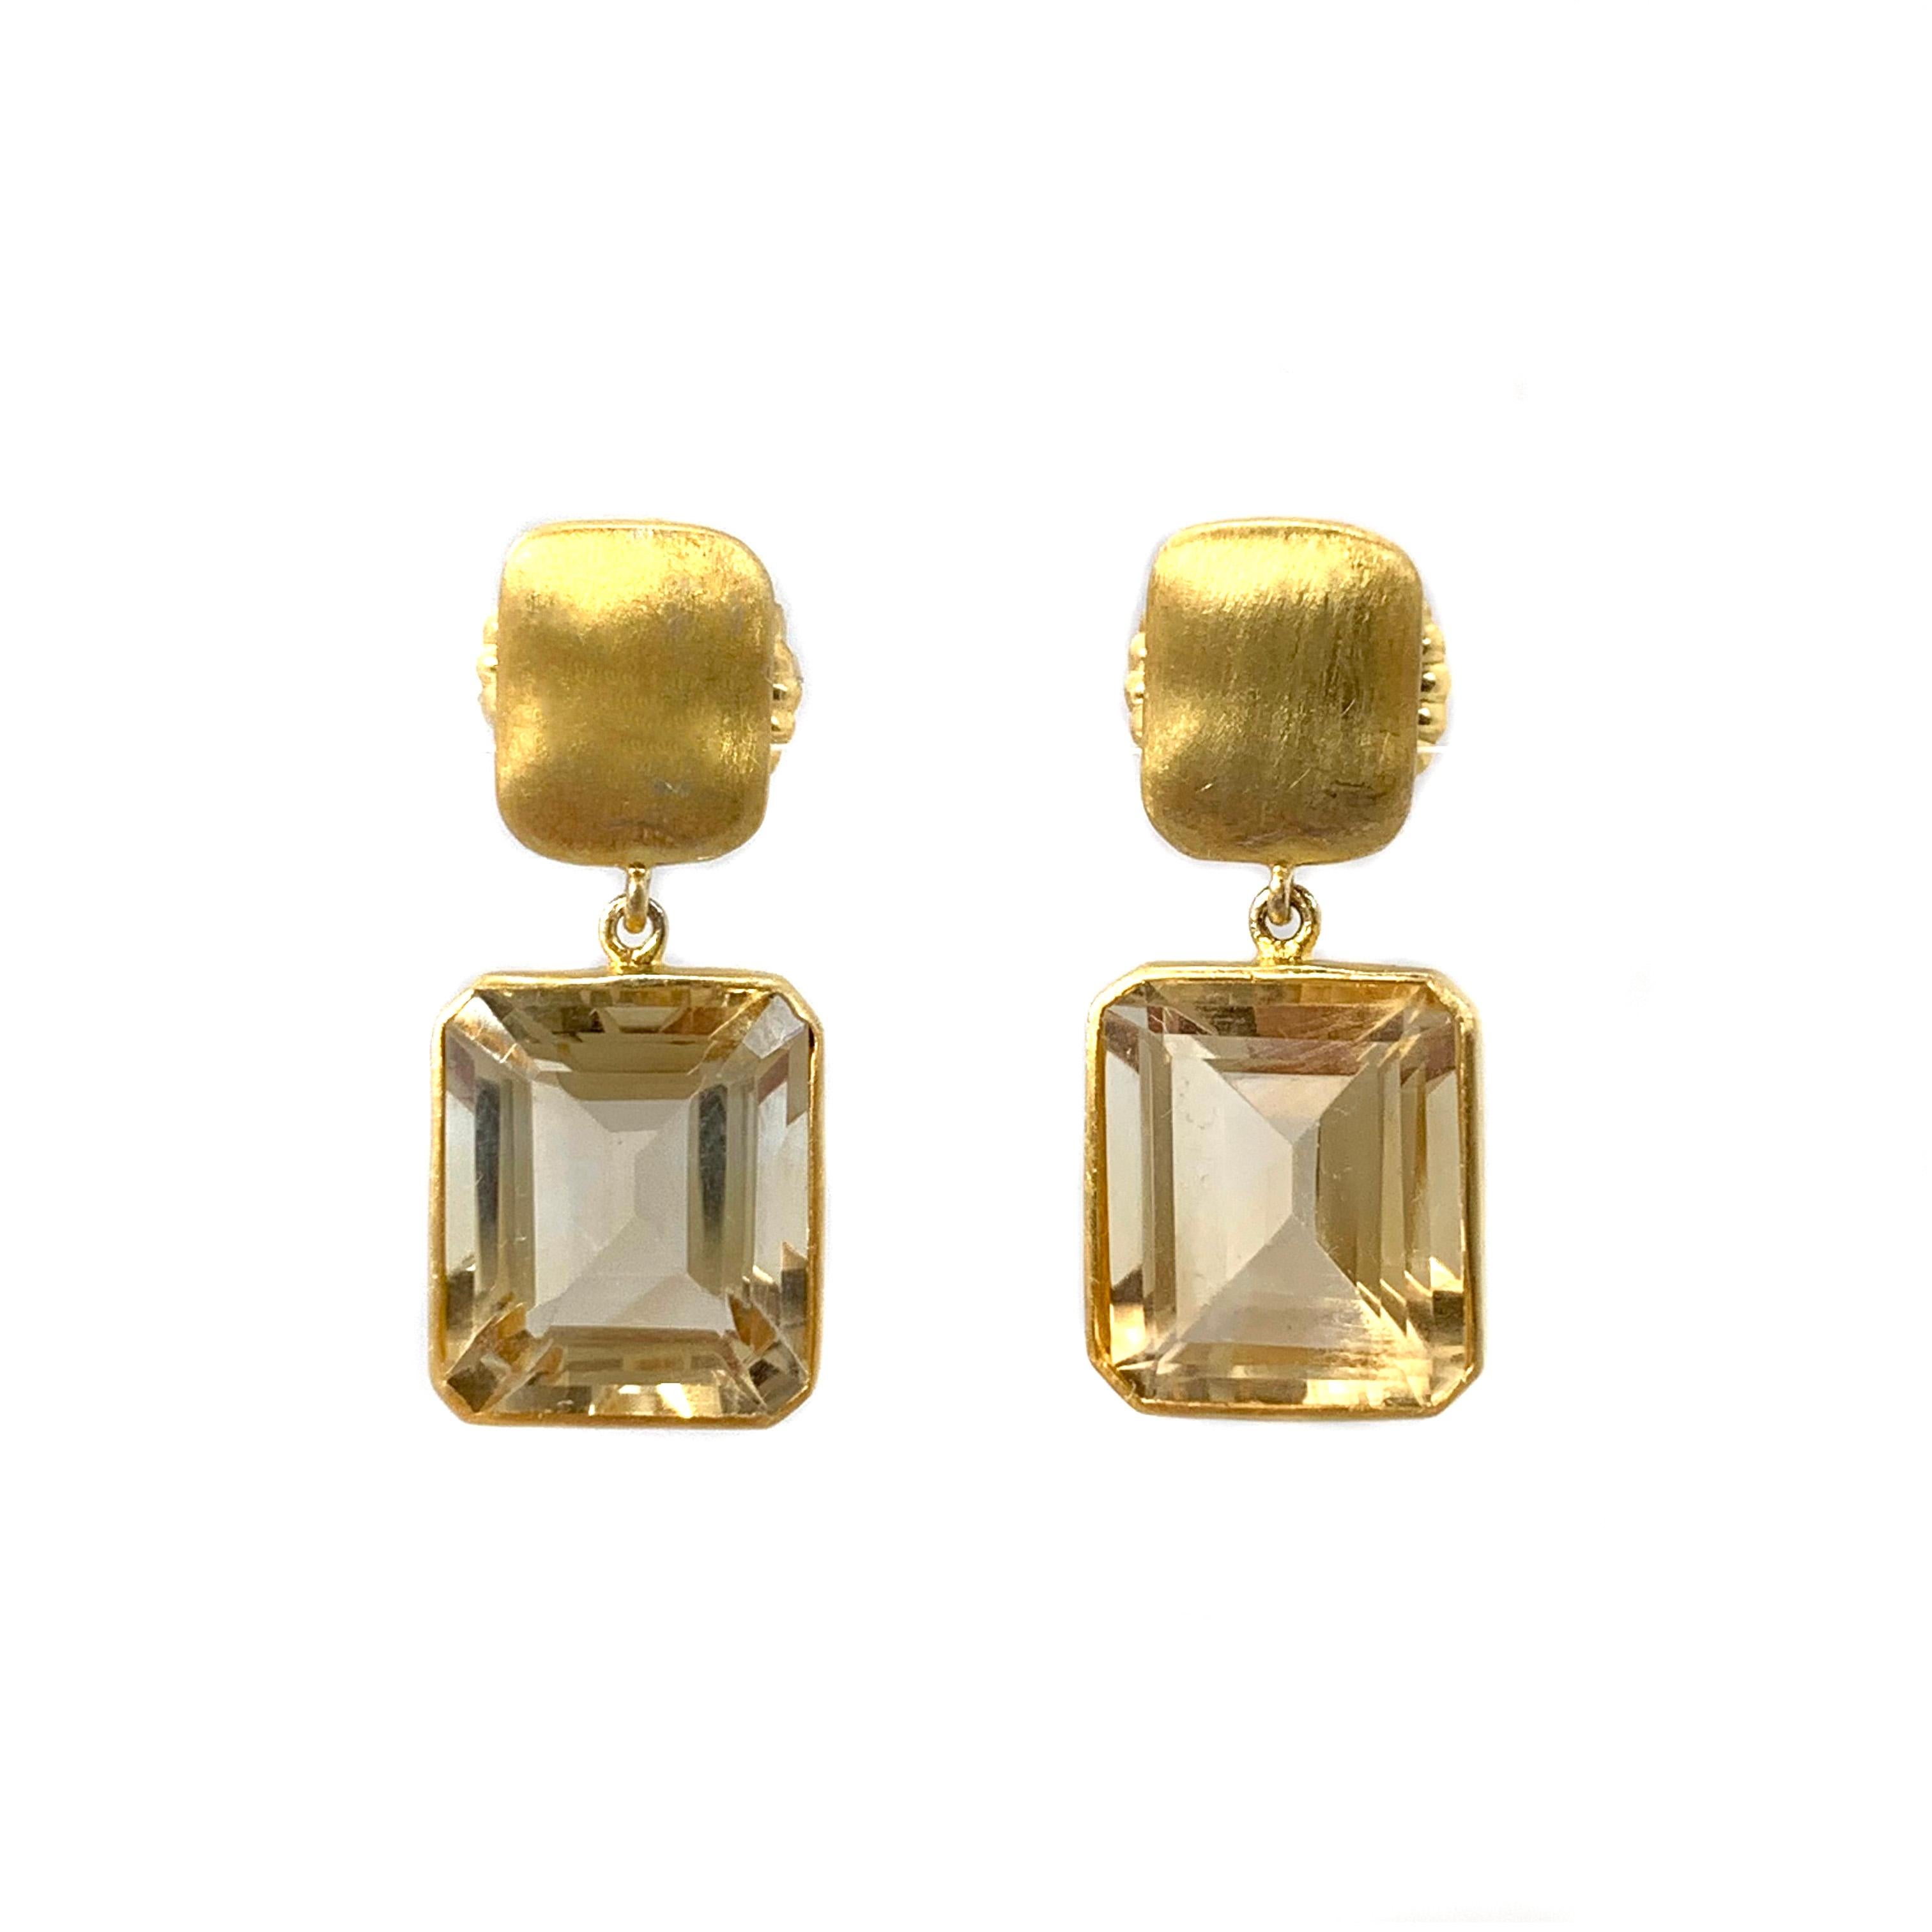 Bijoux Num Emerald-Cut Brazilian Citrine Drop Earrings

The earrings feature a pair of beautiful emerald-cut Brazilian citrine, handset in 18k yellow gold vermeil over sterling silver, straight post back with large friction backs.  Top part is a